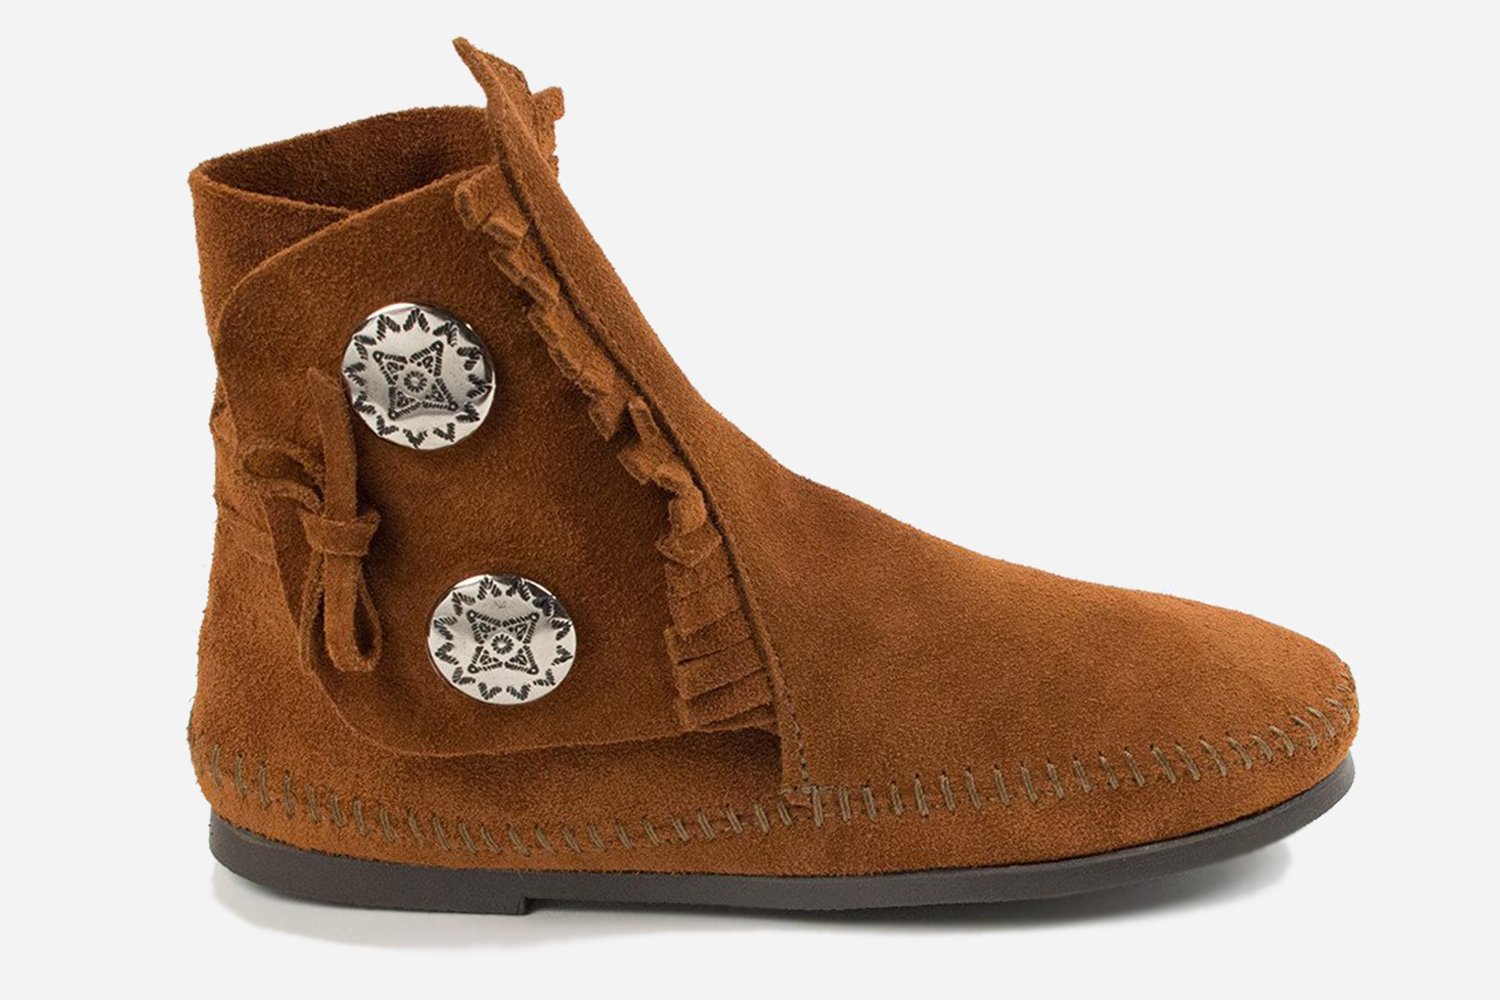 Brad Pitt's Boots Two Button Hardsole Minnetonka Moccasin From "Once Upon a Time in Hollywood"